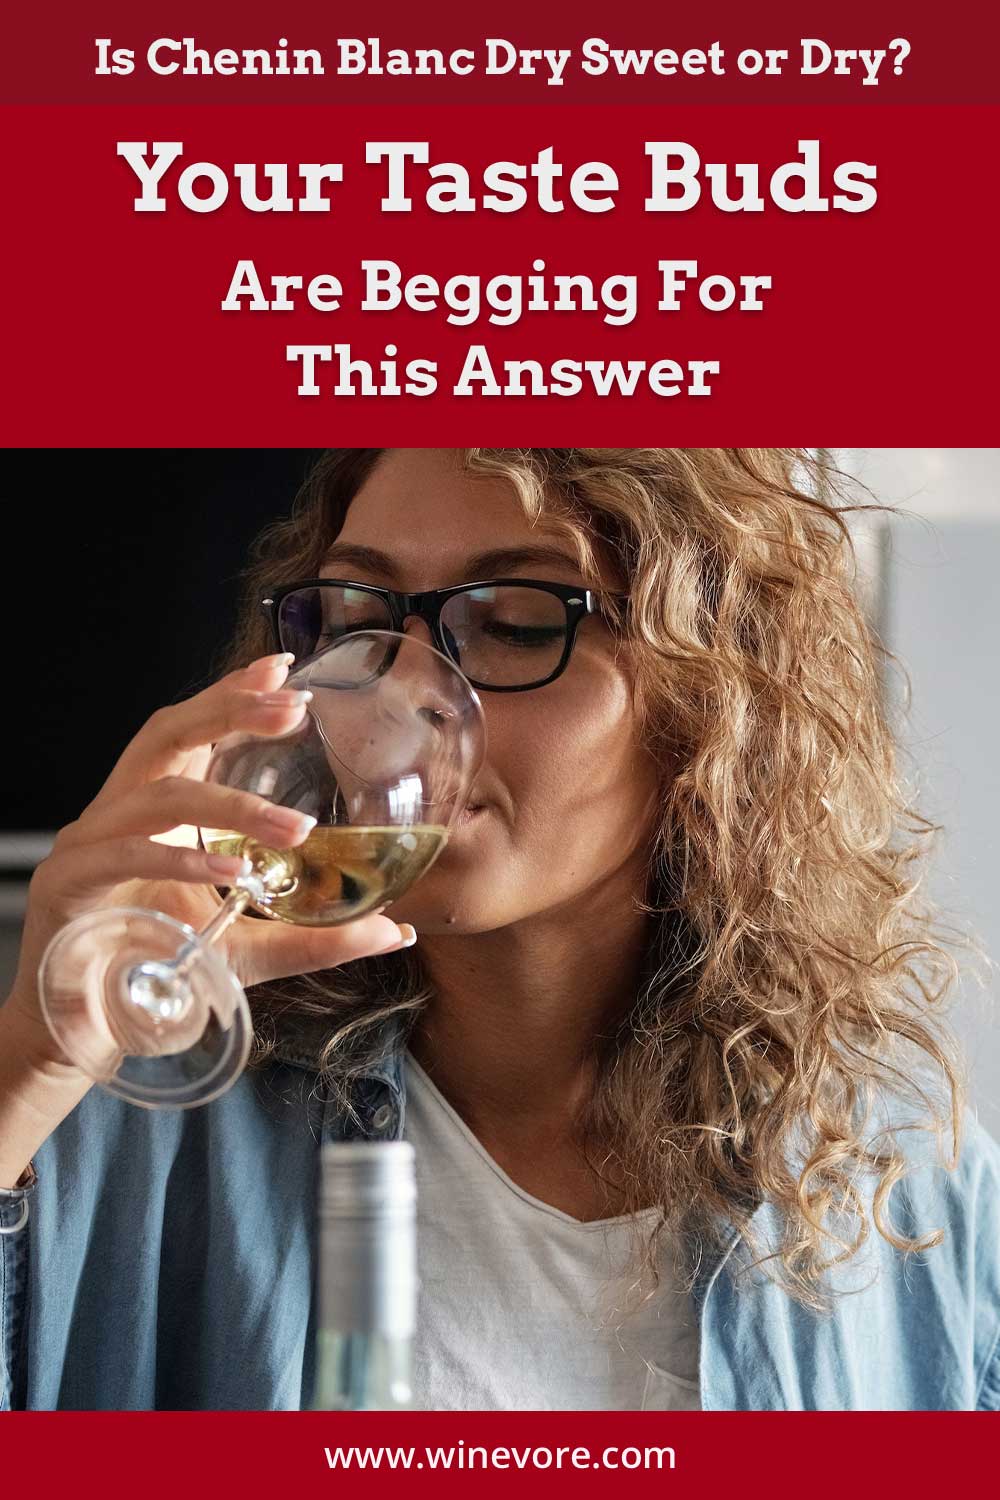 Woman drinking white wine from a glass - Is Chenin Blanc Dry Sweet or Dry?